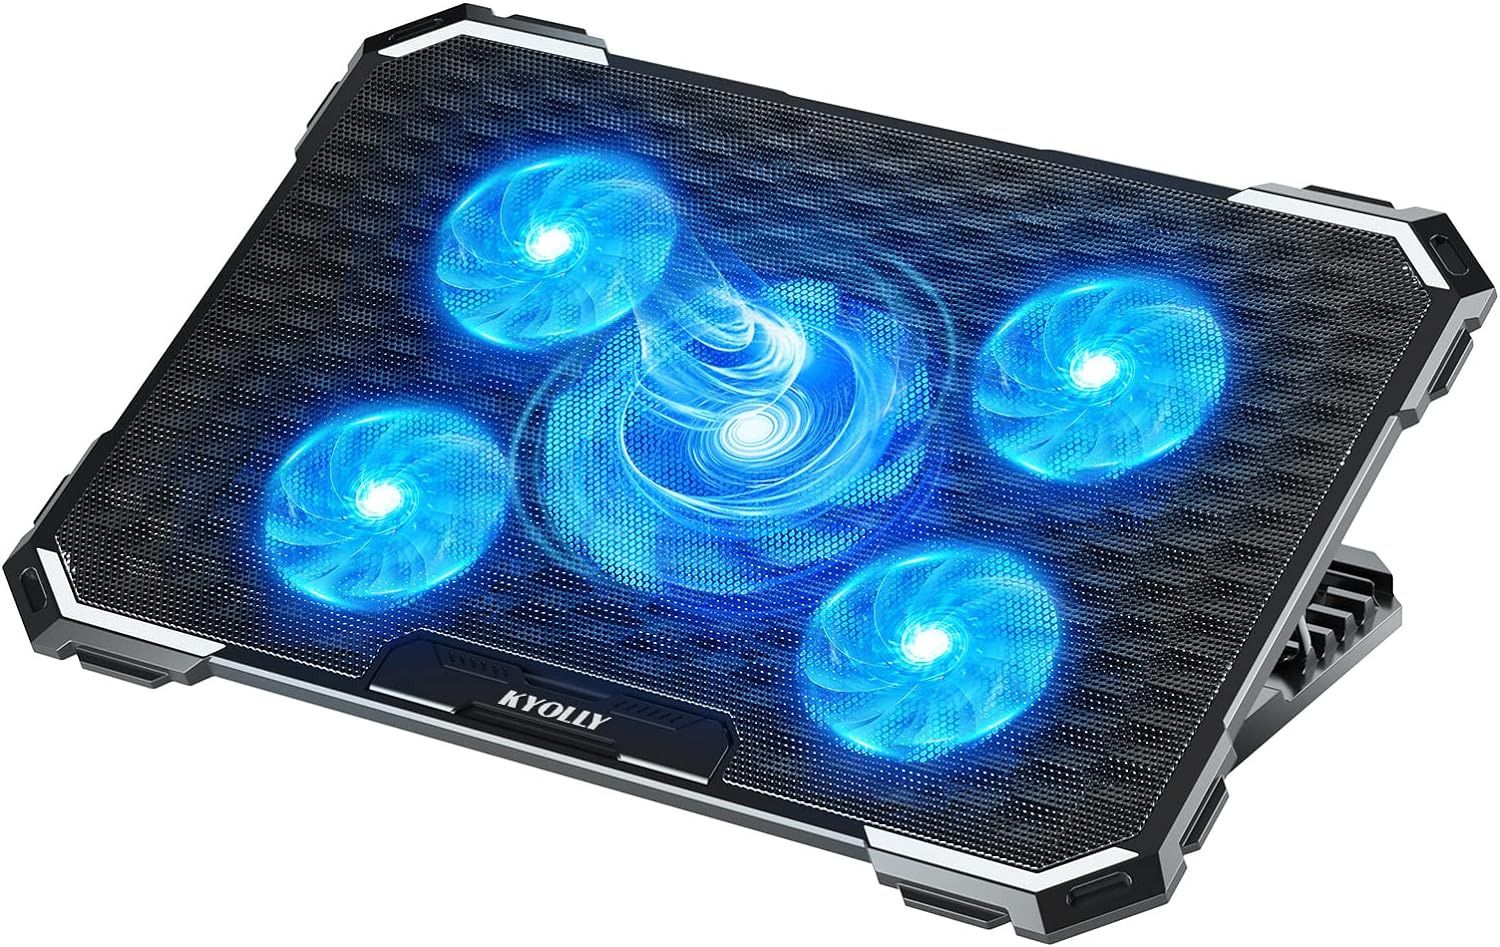 Upgrade Laptop Cooling Pad,Gaming Laptop Cooler with 5 Quiet Fans,2 USB Ports,5 